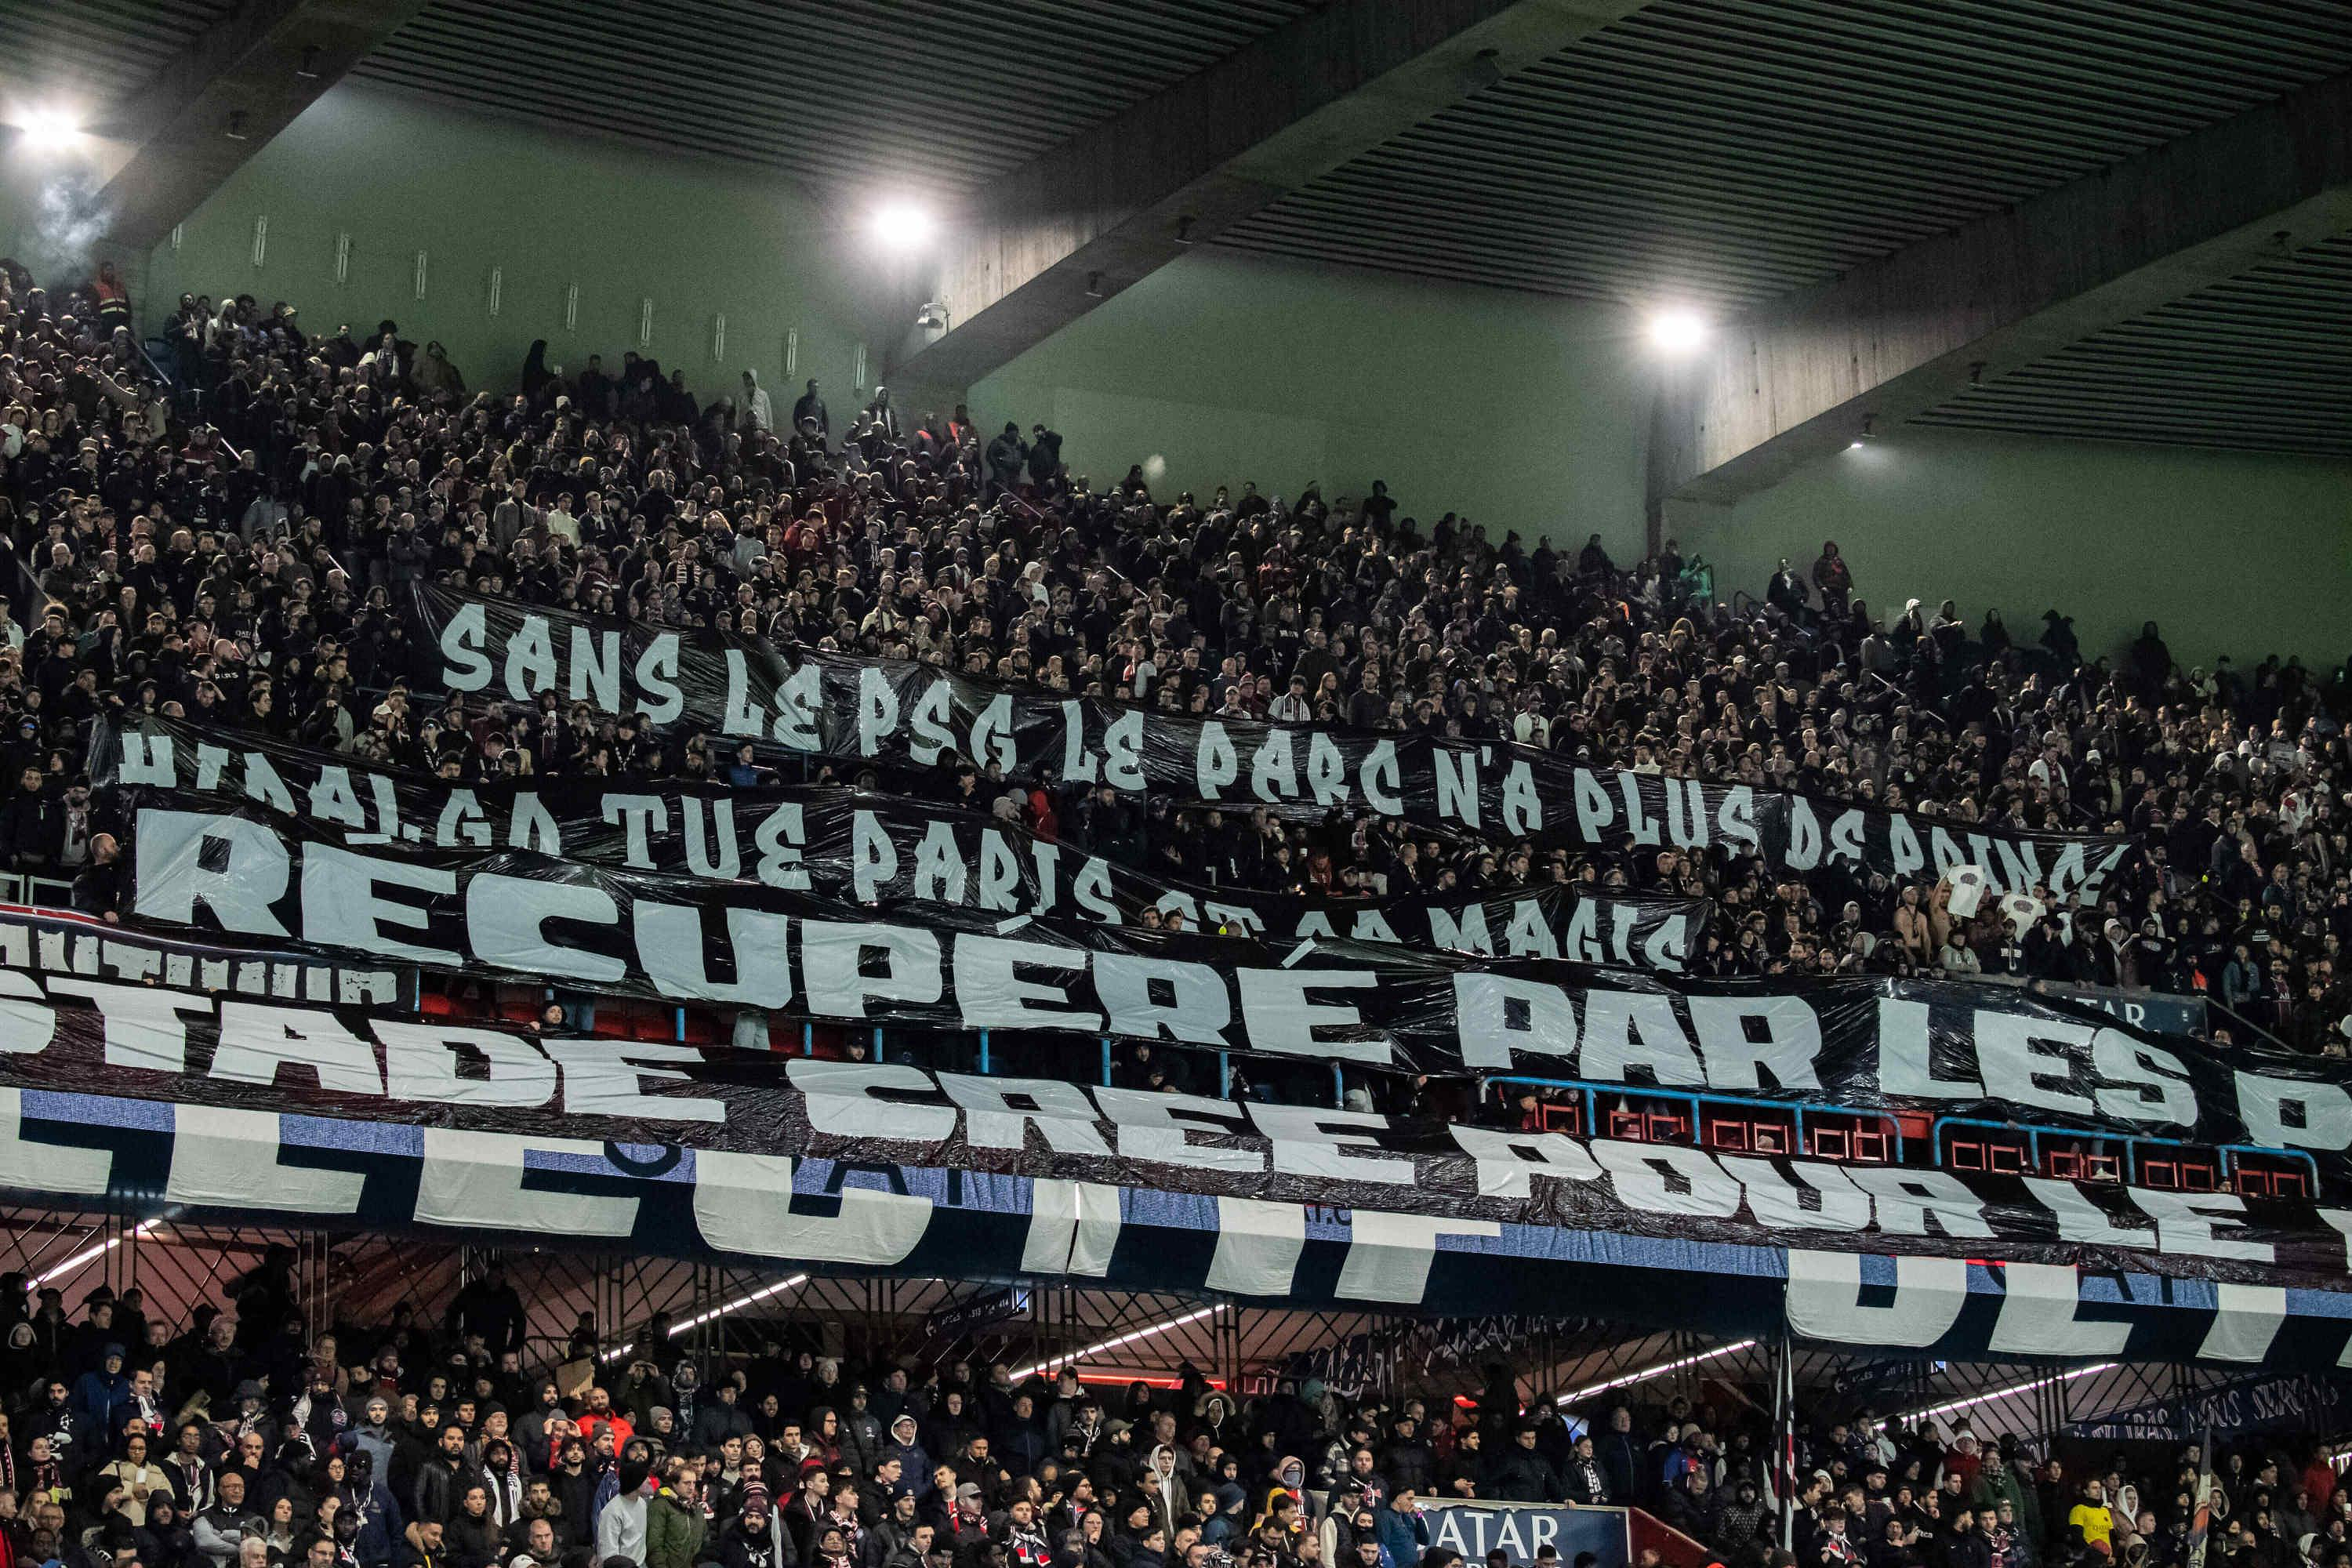 Ligue 1: Paris town hall takes legal action after sexist and homophobic insults from PSG ultras targeting Anne Hidalgo